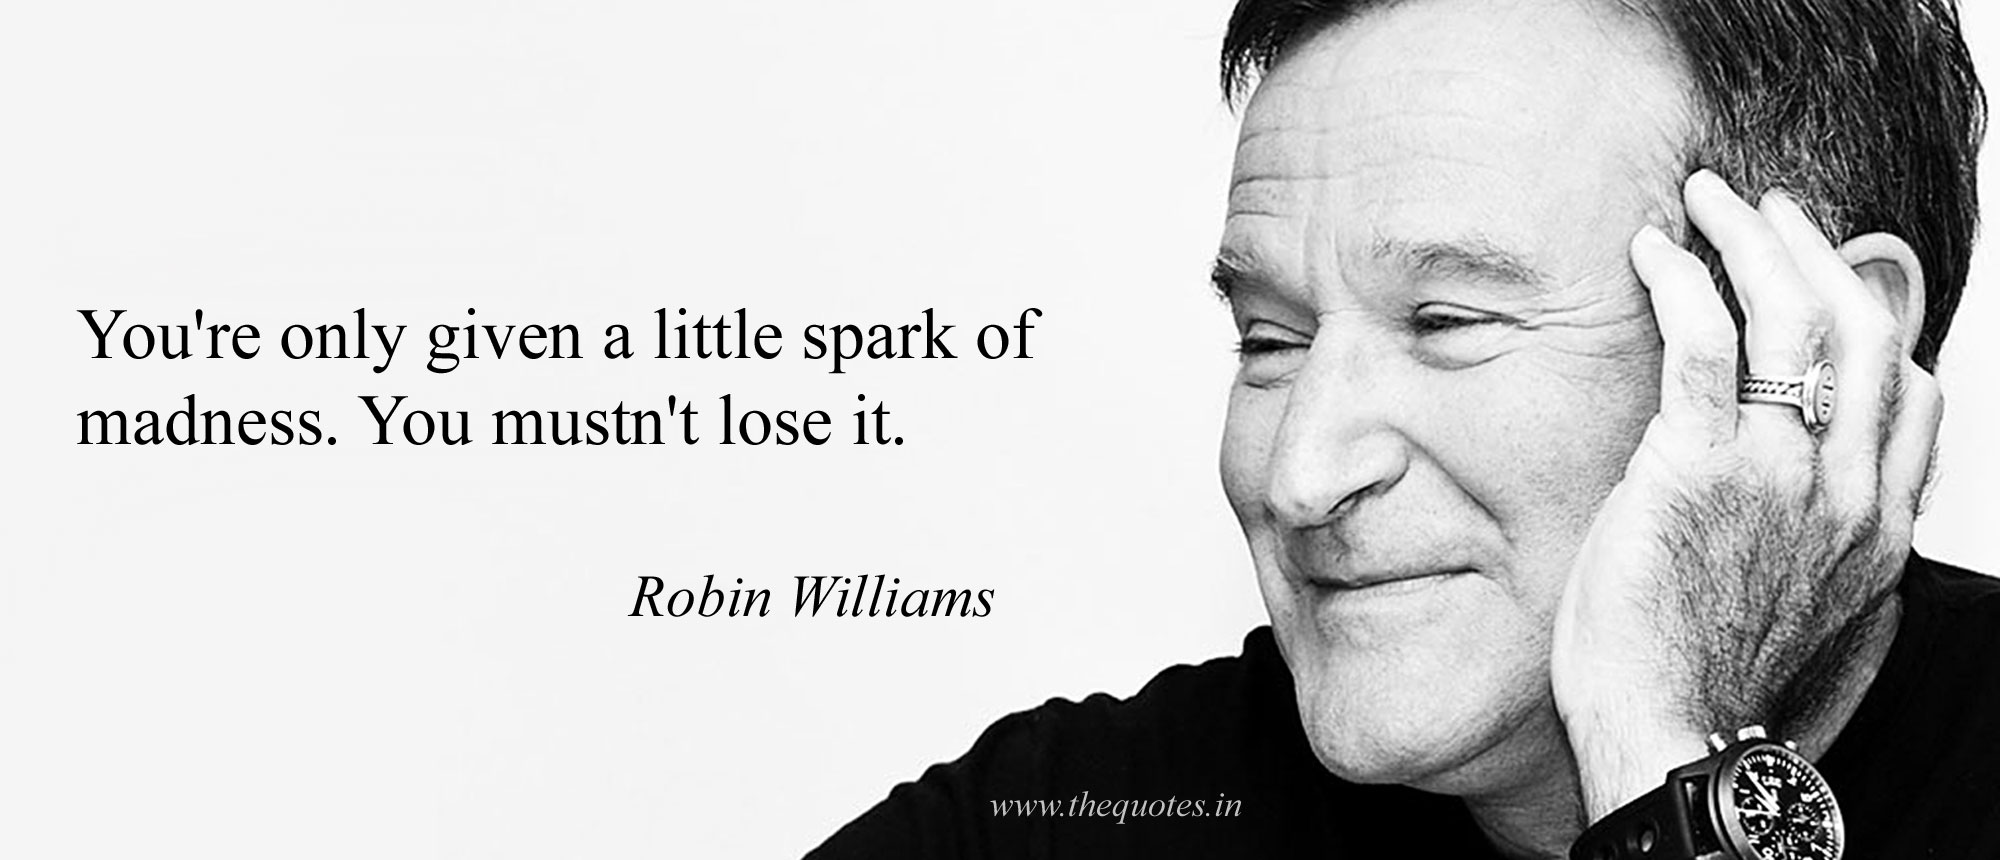 Robin Williams – little spark of madness